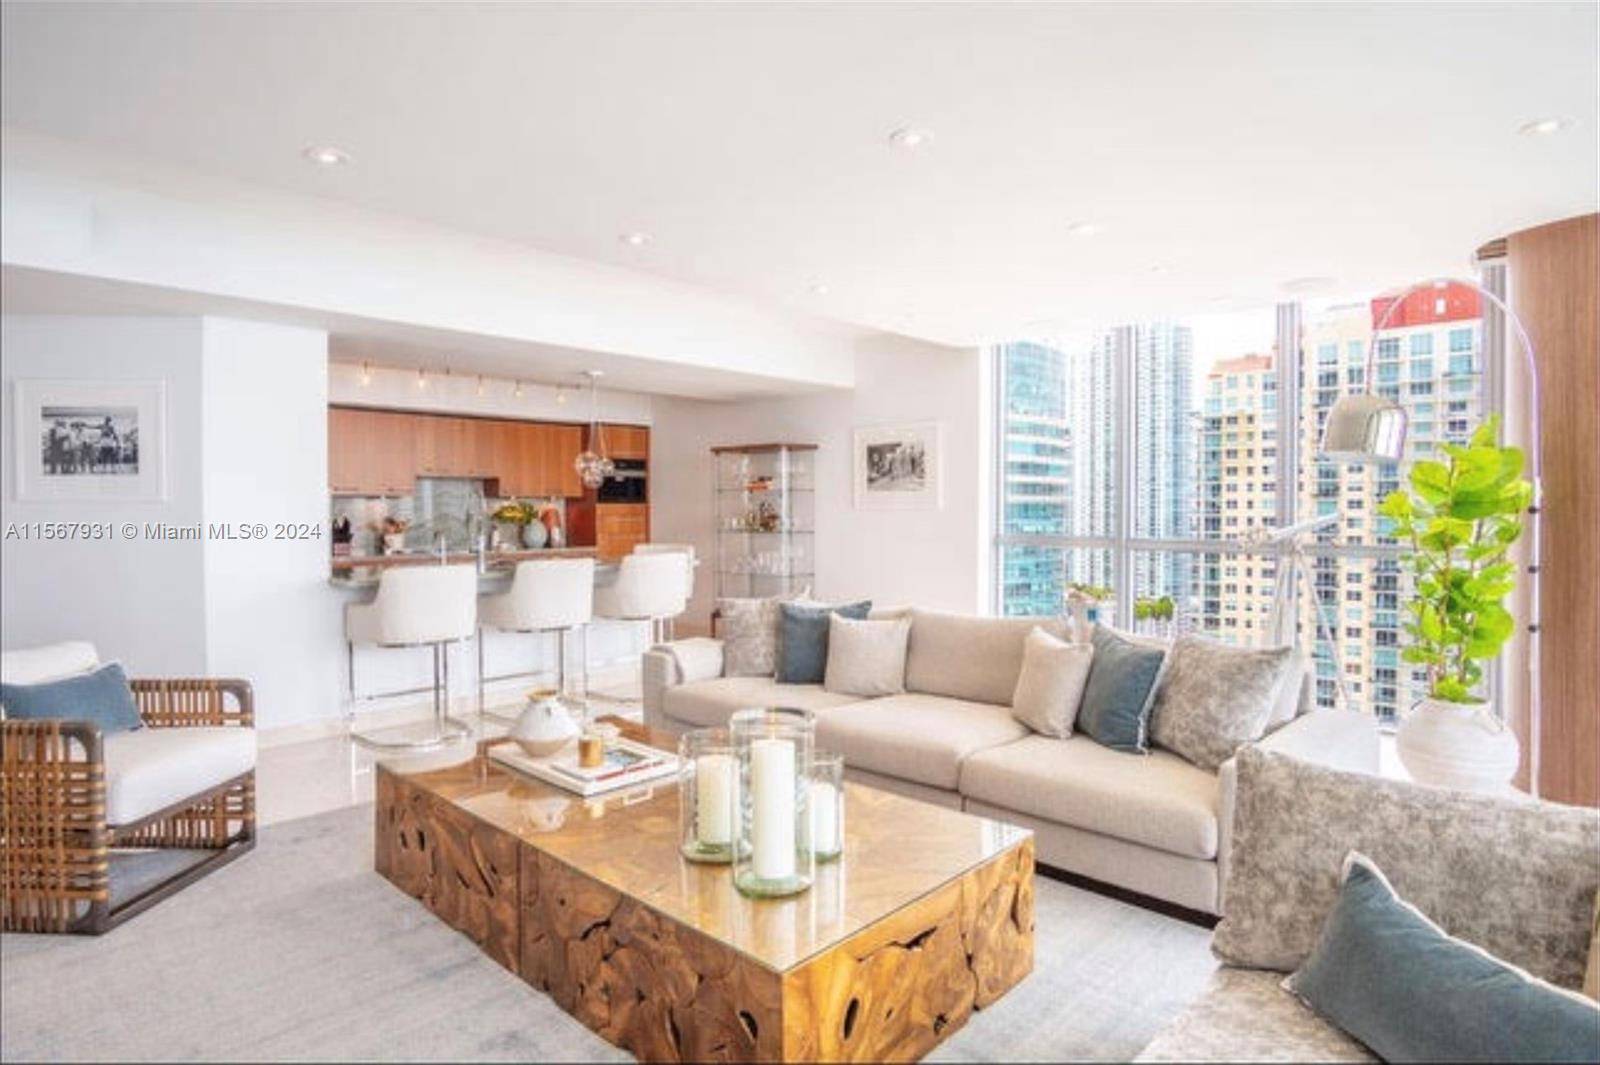 Experience the luxury of Jade Residences at Brickell with direct panoramic views of the ocean on the most sought after corner unit.